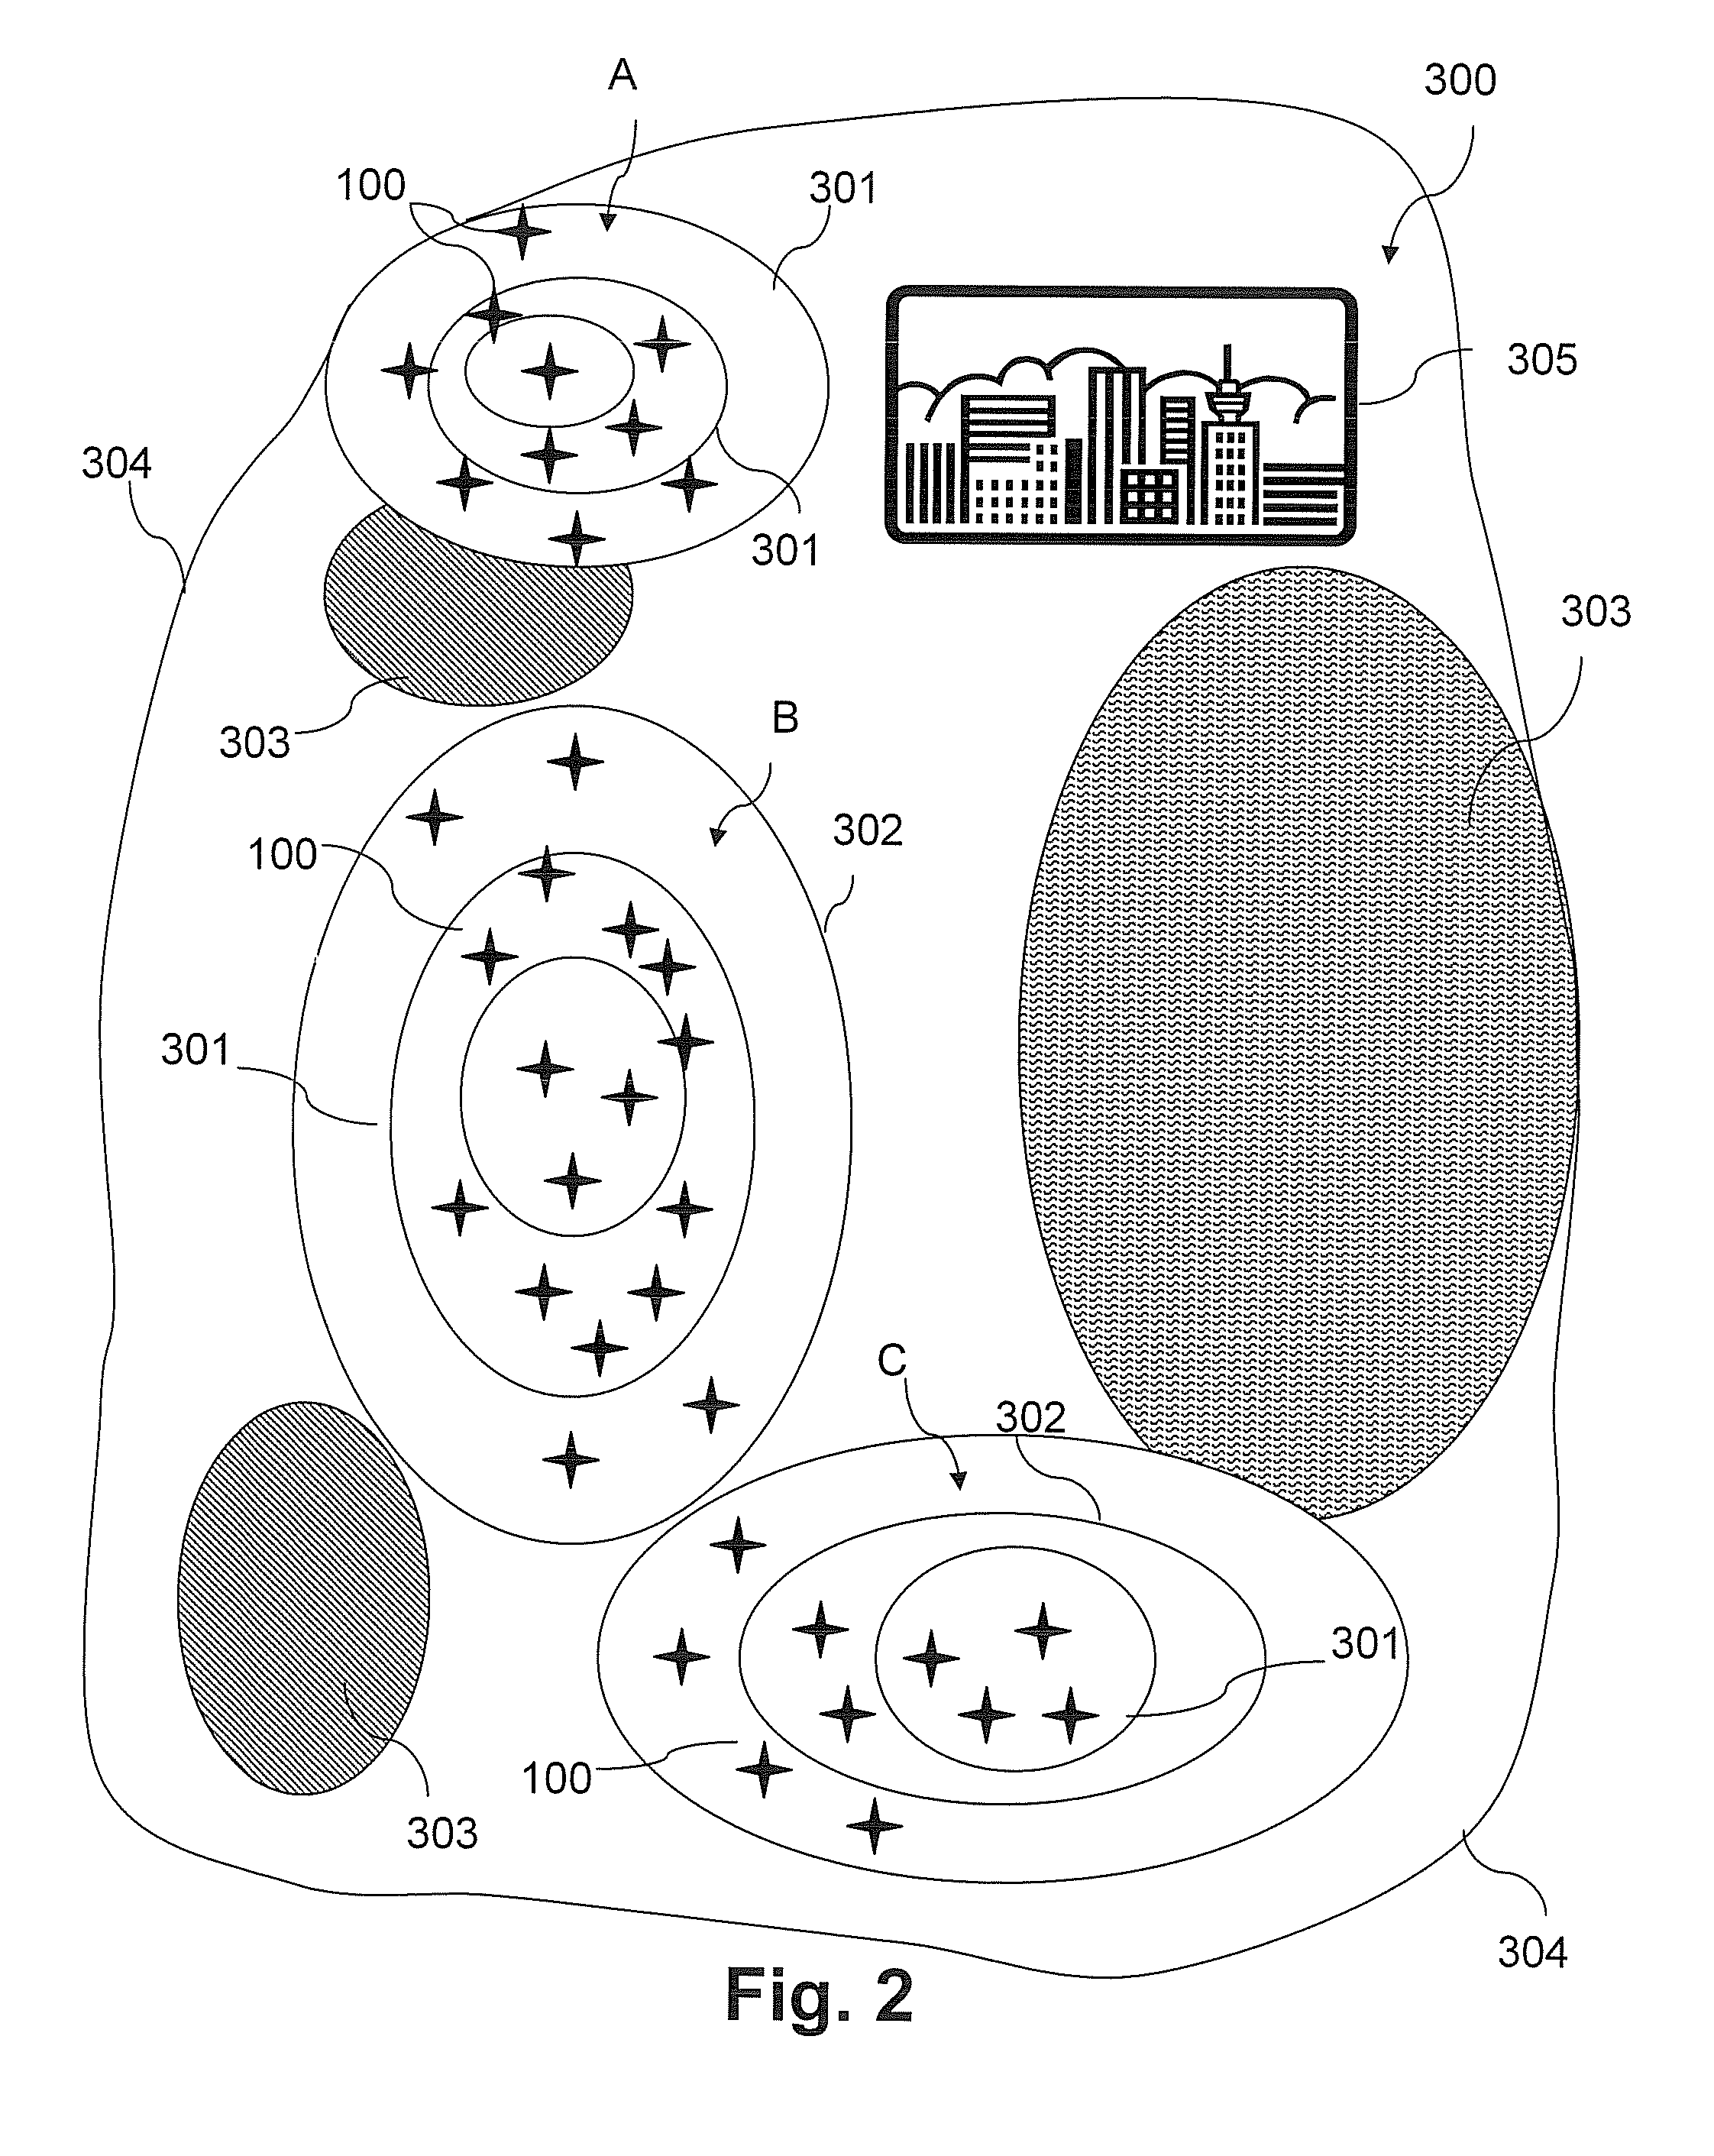 Method for enhancement of a wind plant layout with multiple wind turbines